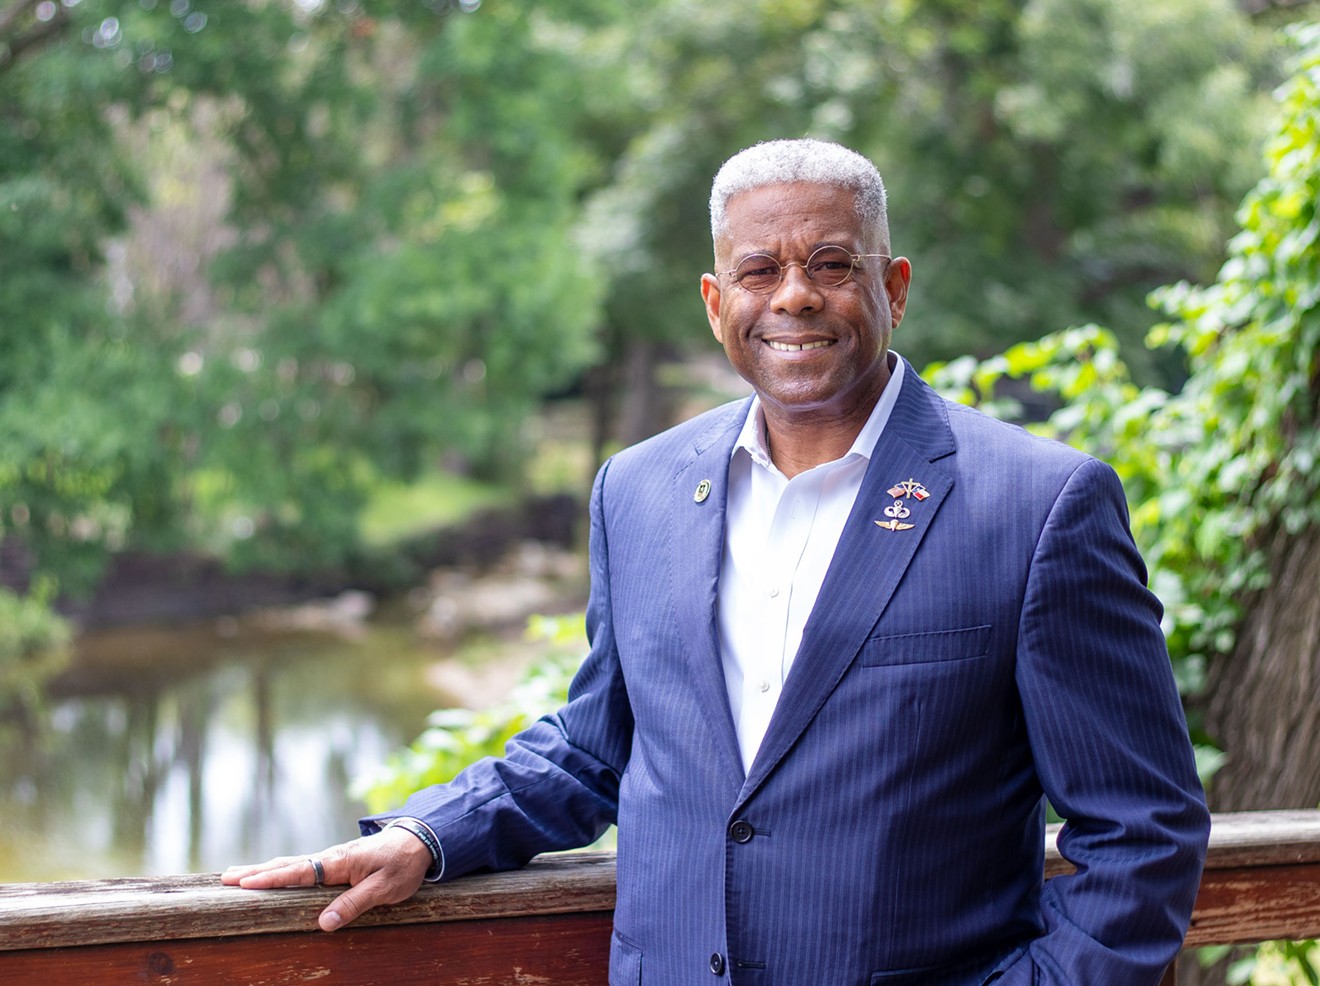 Allen West is a lifelong Republican who's now running for Texas governor.